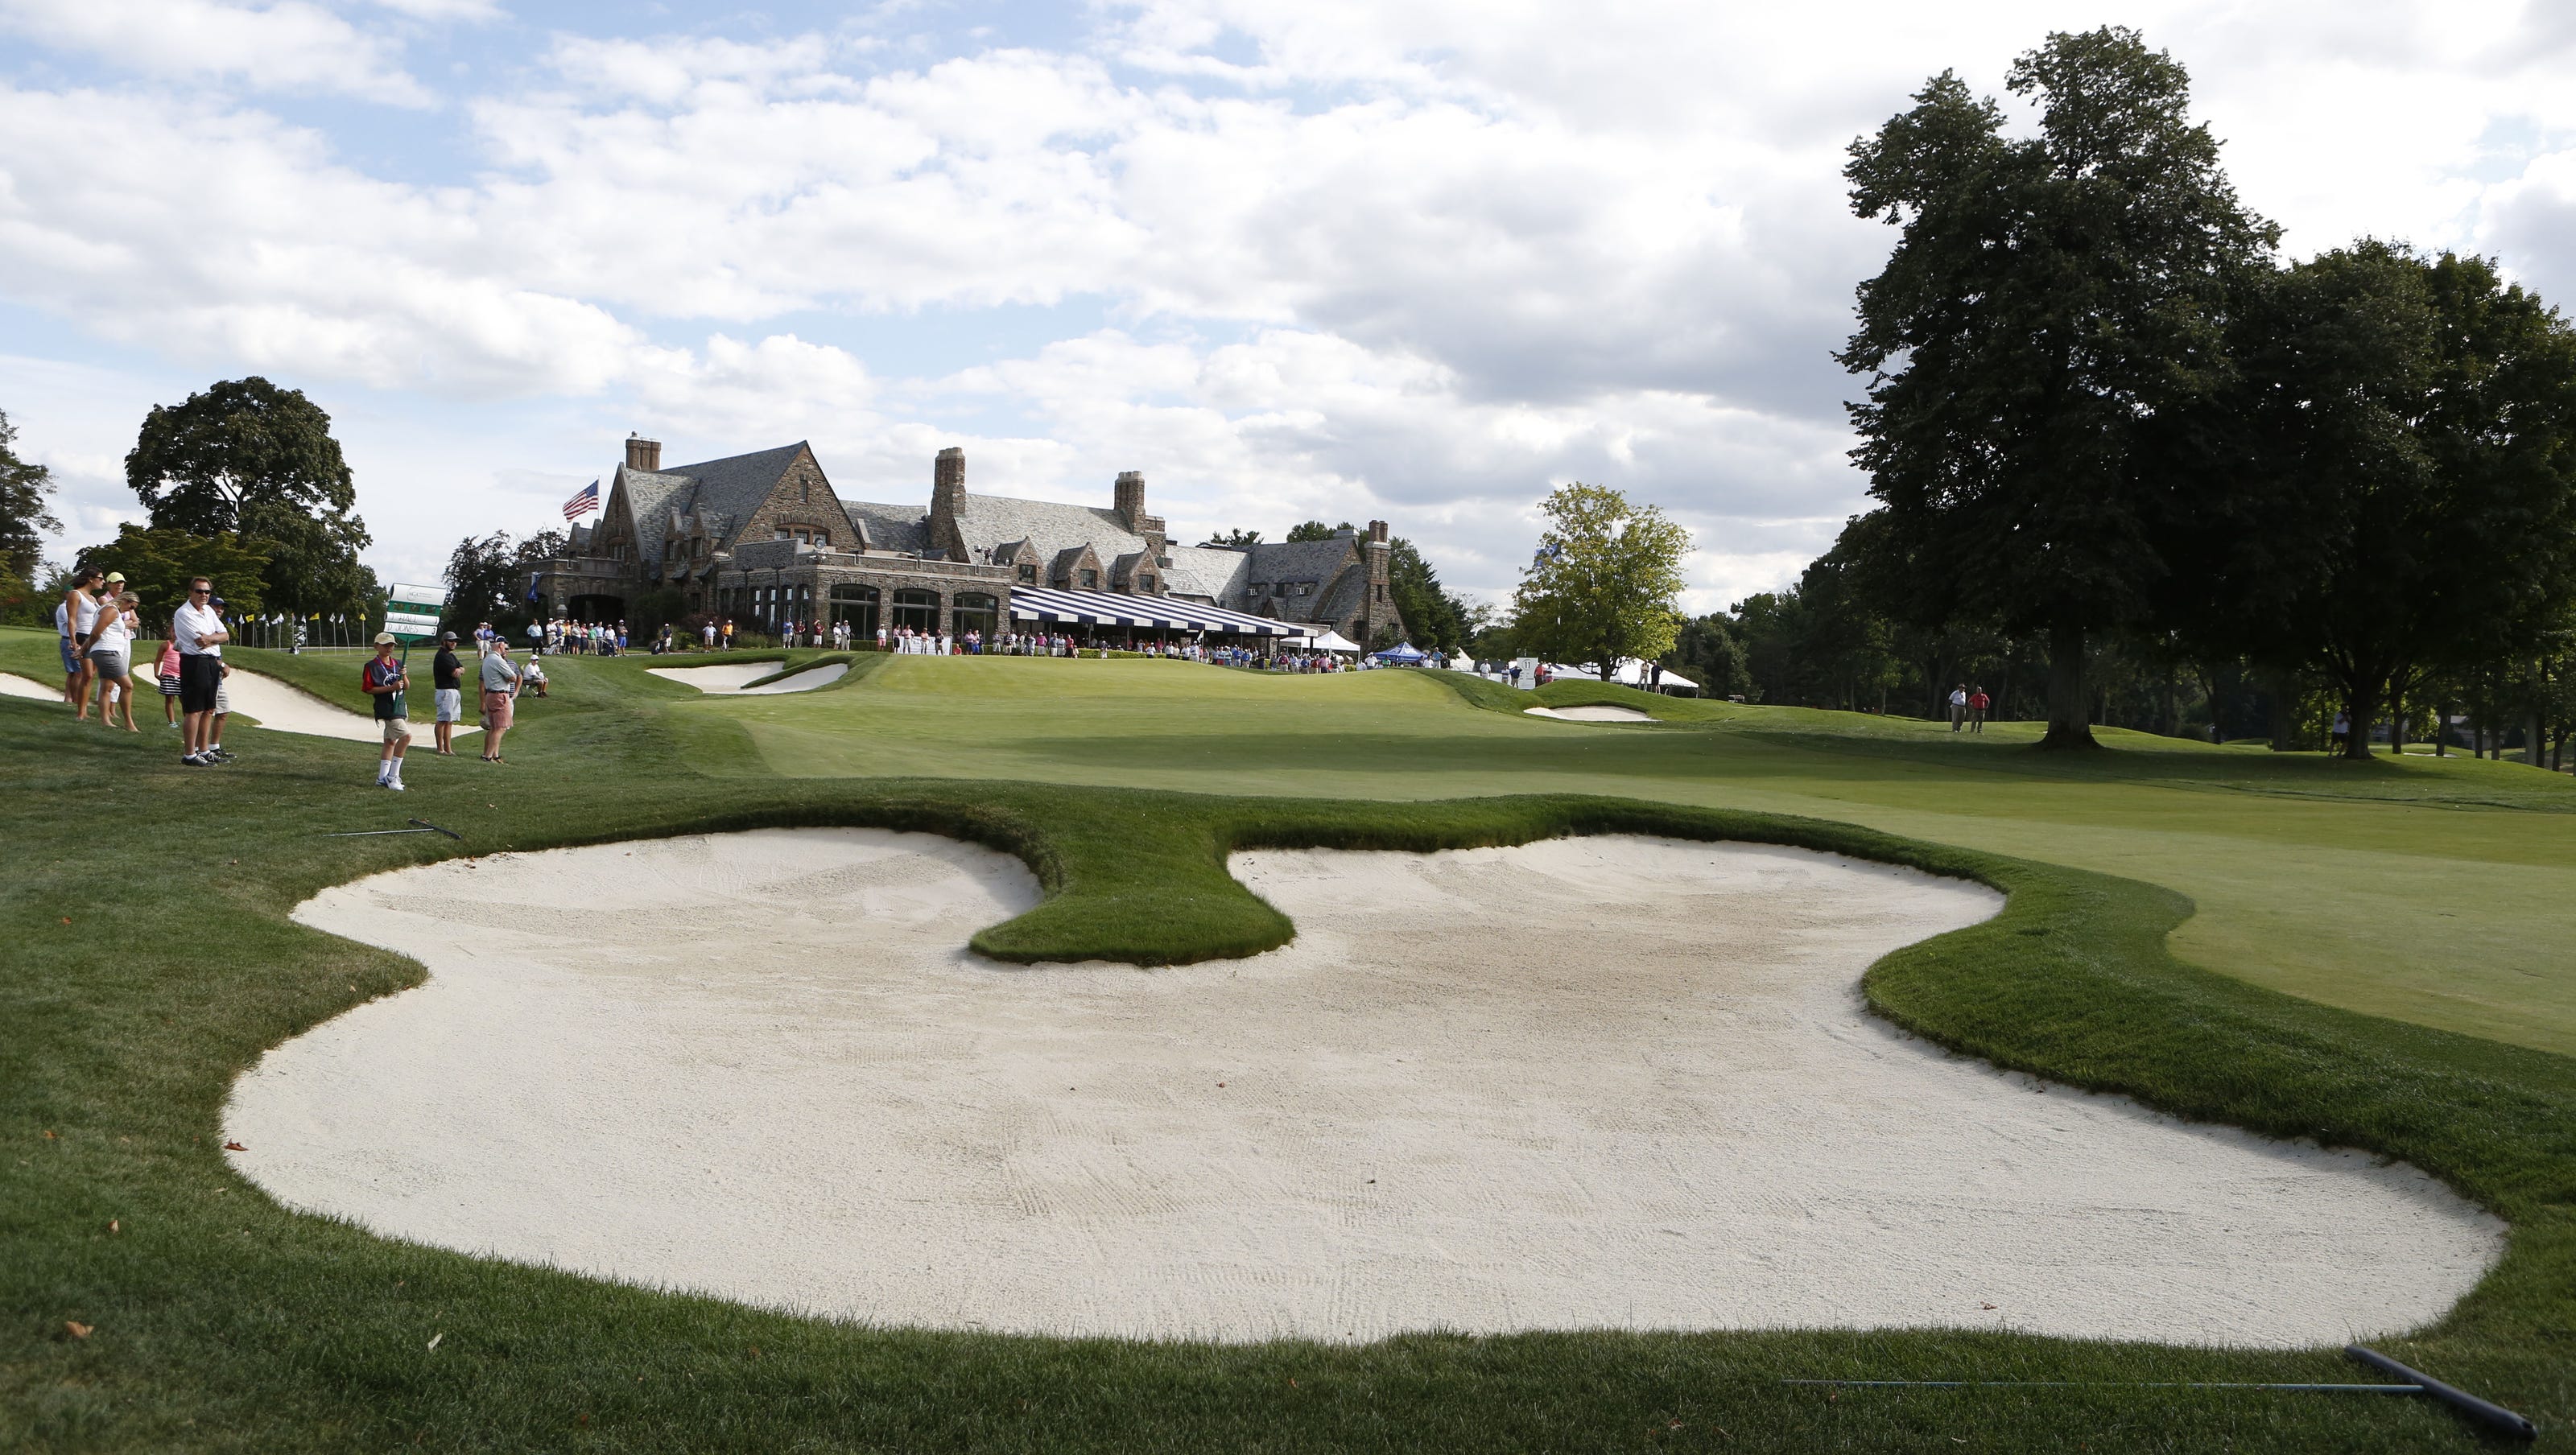 Golf: U.S. Open at Winged Foot is postponed to Sept. 17